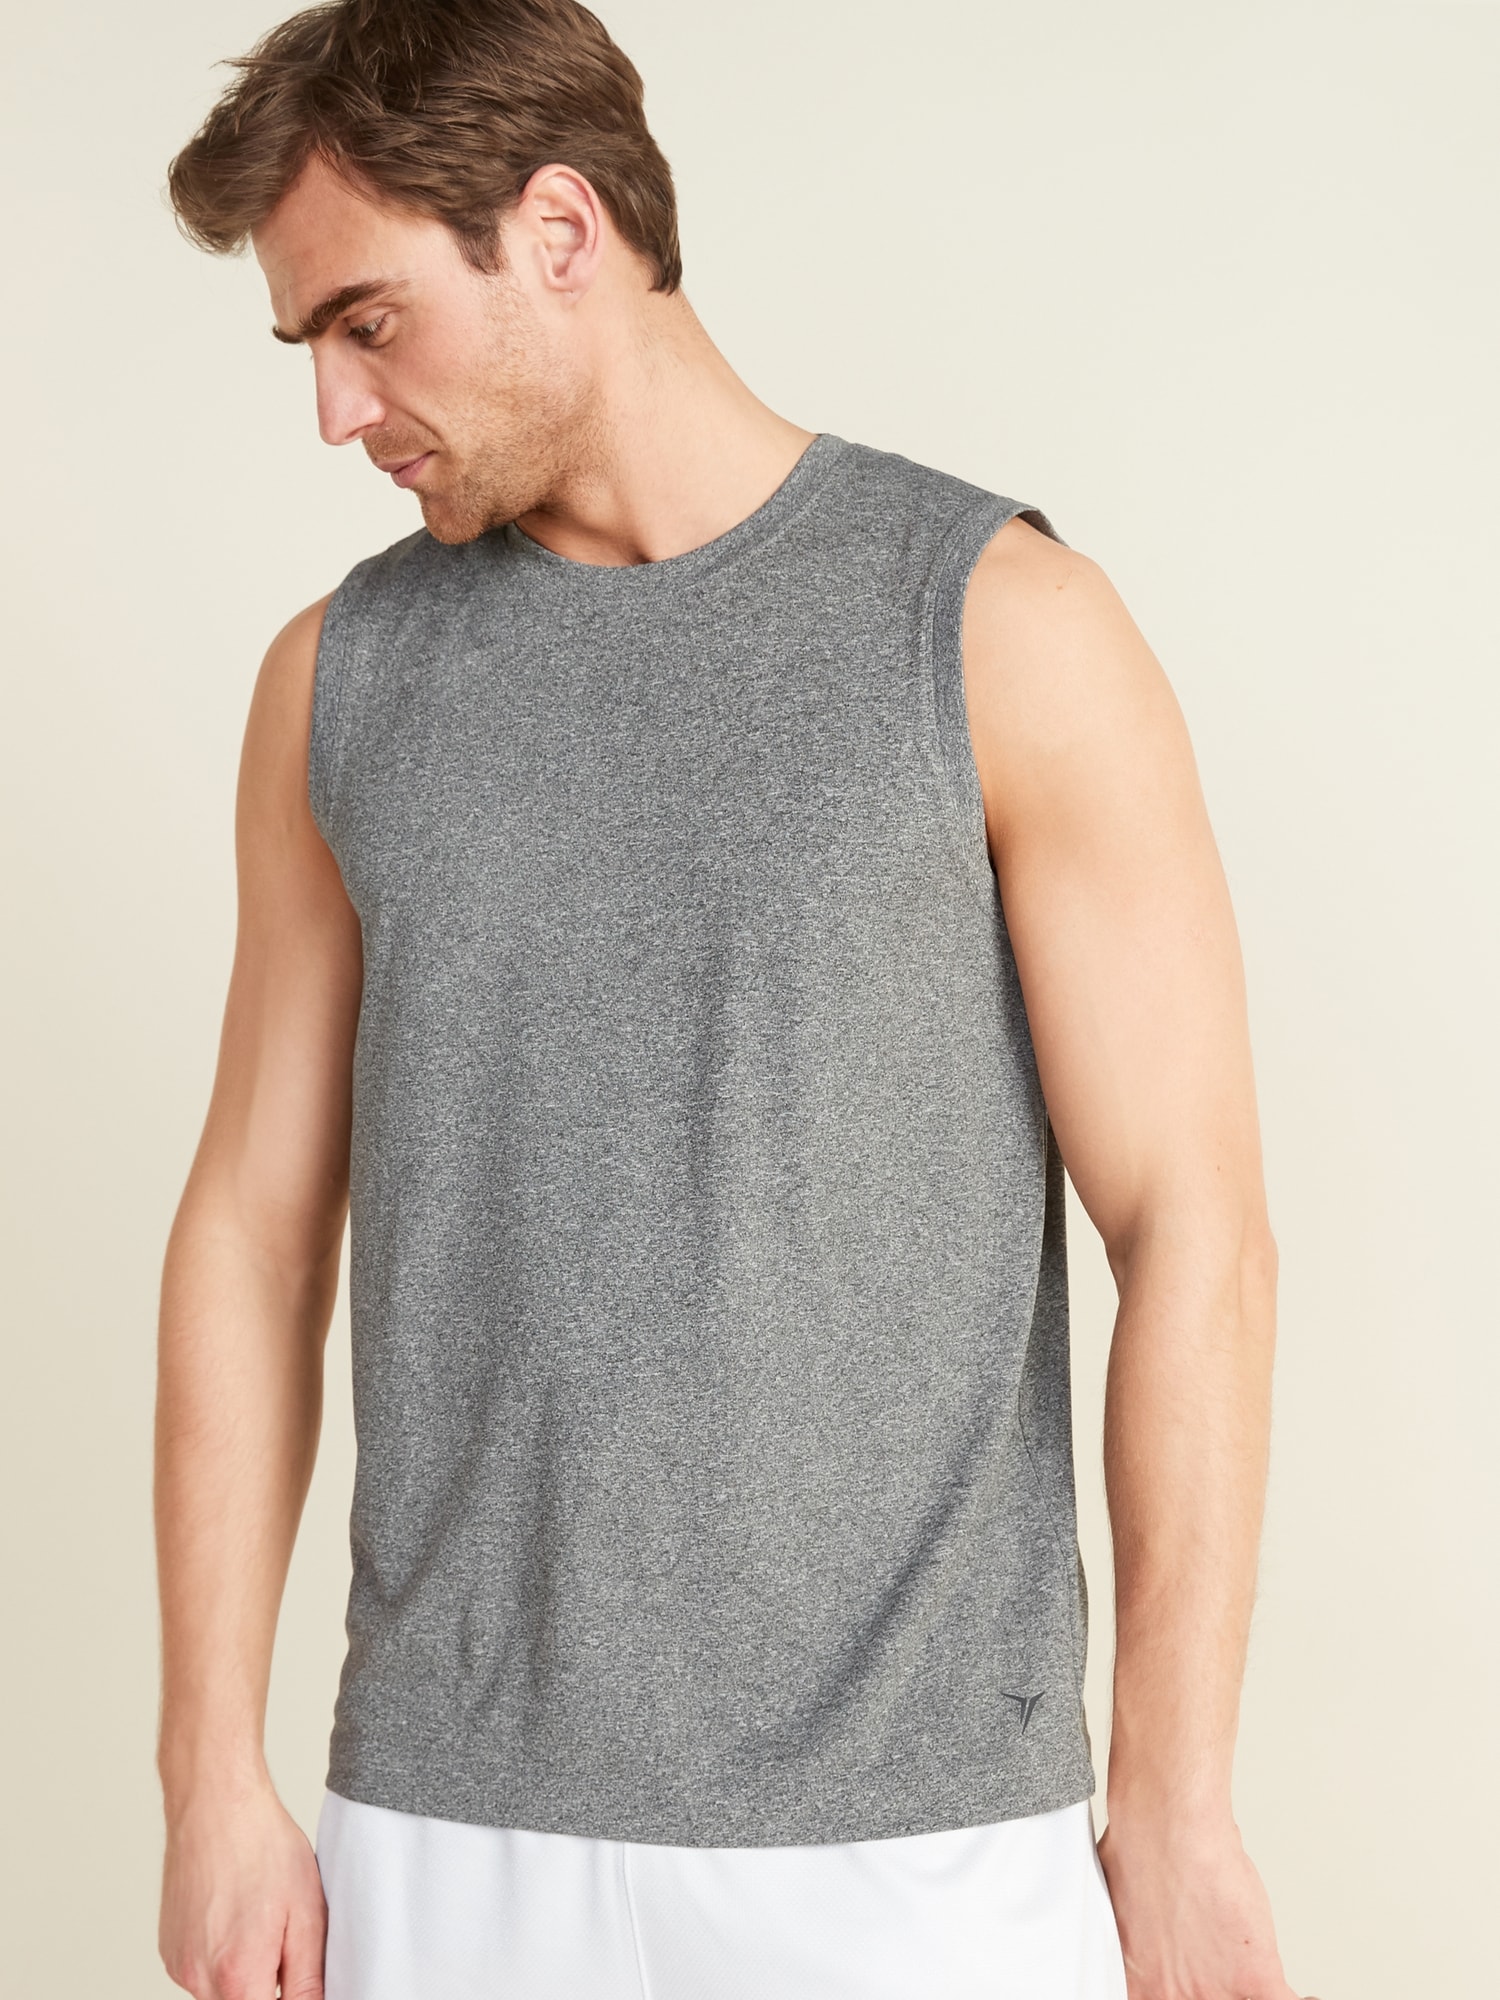 Old Navy Go-Dry Cool Odor-Control Core Tank Top for Men gray. 1